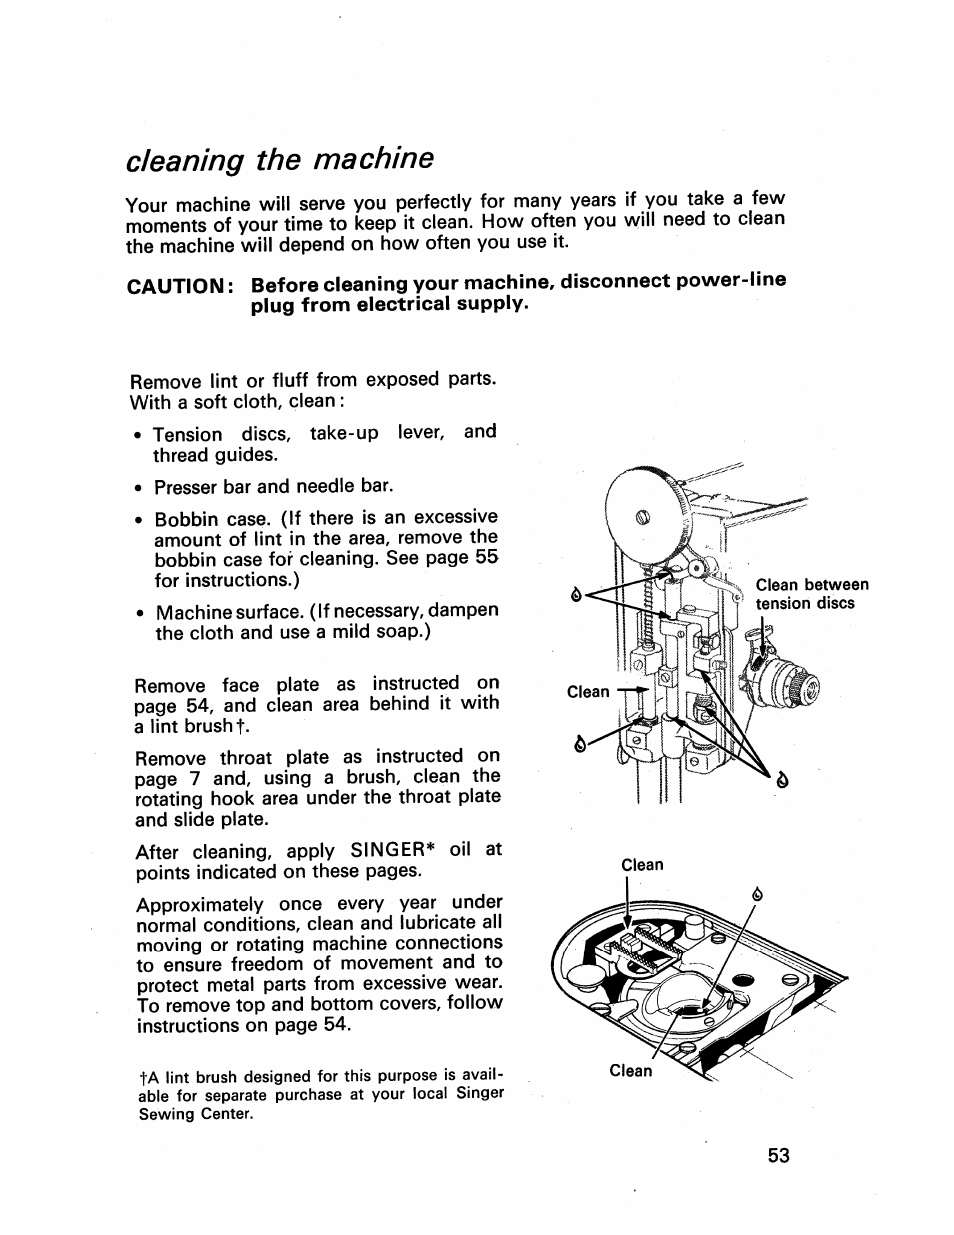 Cleaning the machine, Caring for your machine | SINGER 413 User Manual | Page 55 / 64